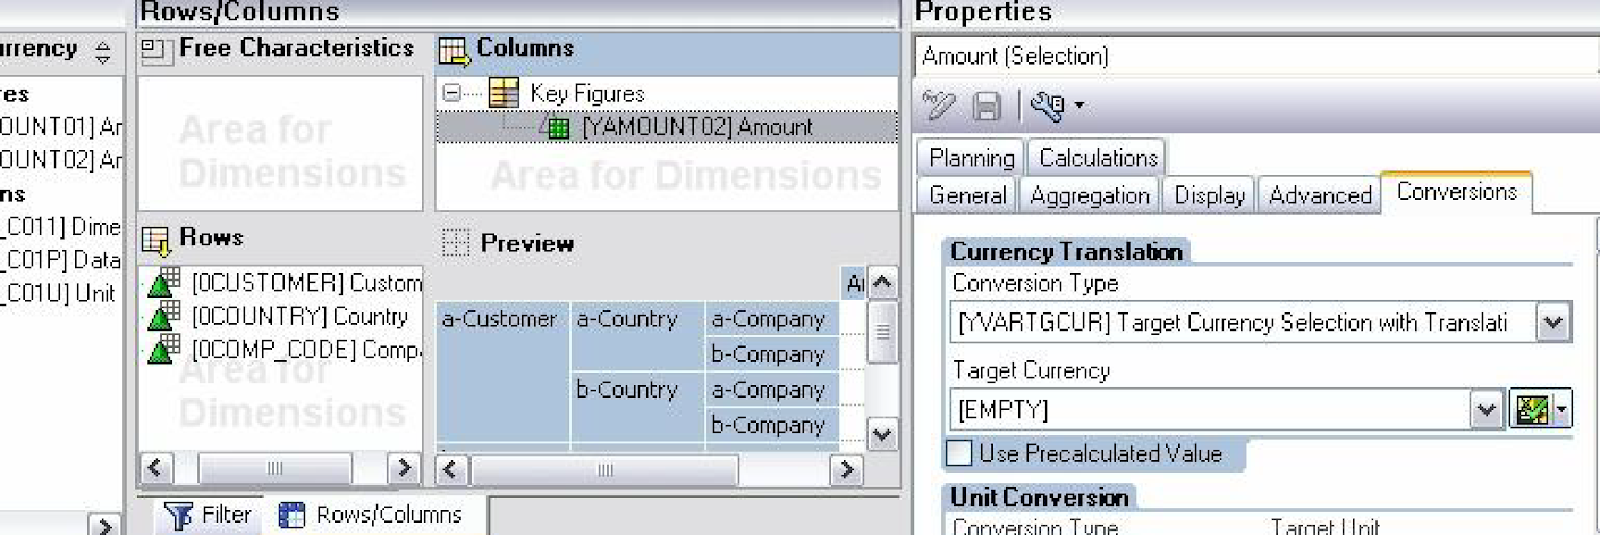 RSCURTRT SAP table for - Currency Translation Types